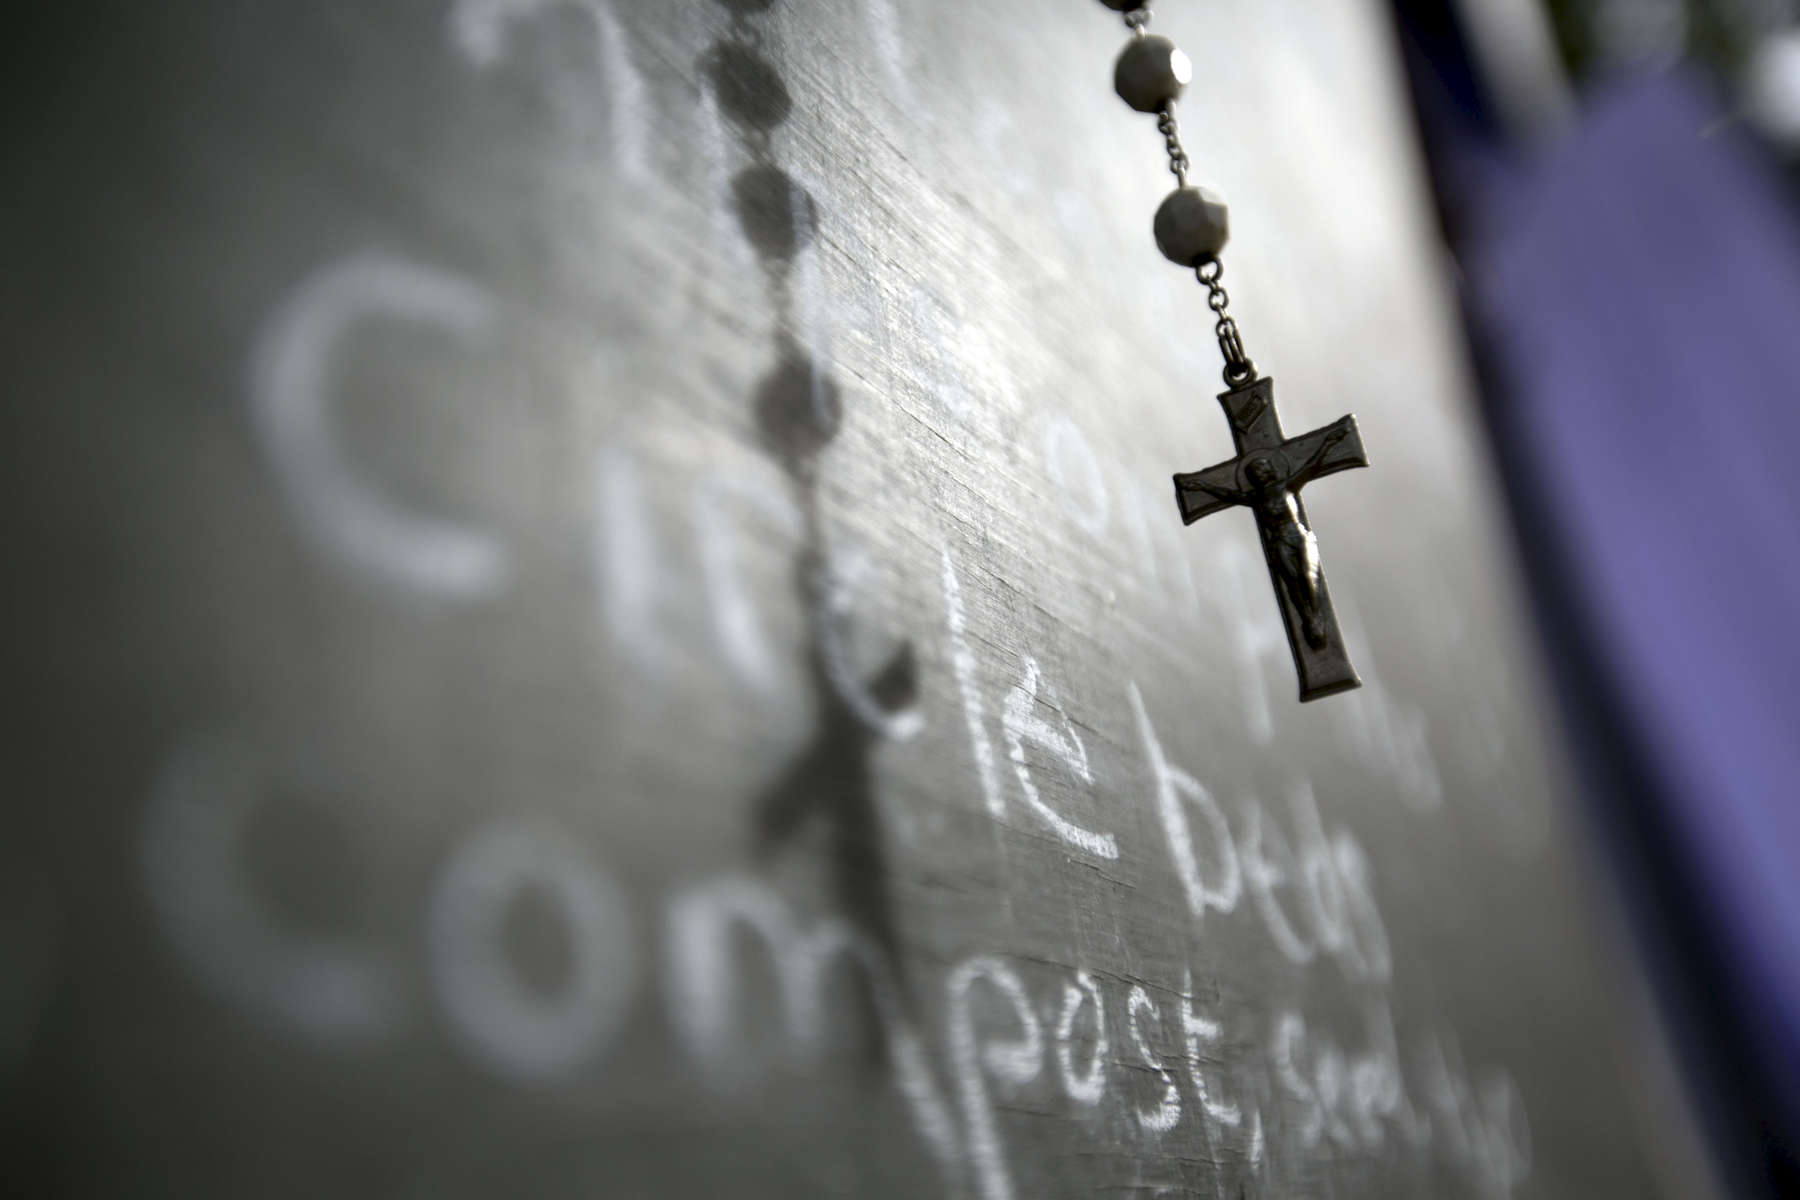 A rosary hangs on a message board in the Greeley Forest Garden in Portland, September 16, 2015. Organizers at the nonprofit Greeley Forest Garden want to partner with other area nonprofits to bring services to the camp, which is on an adjacent lot. Kristyna Wentz-Graff / Staffreligion Catholic